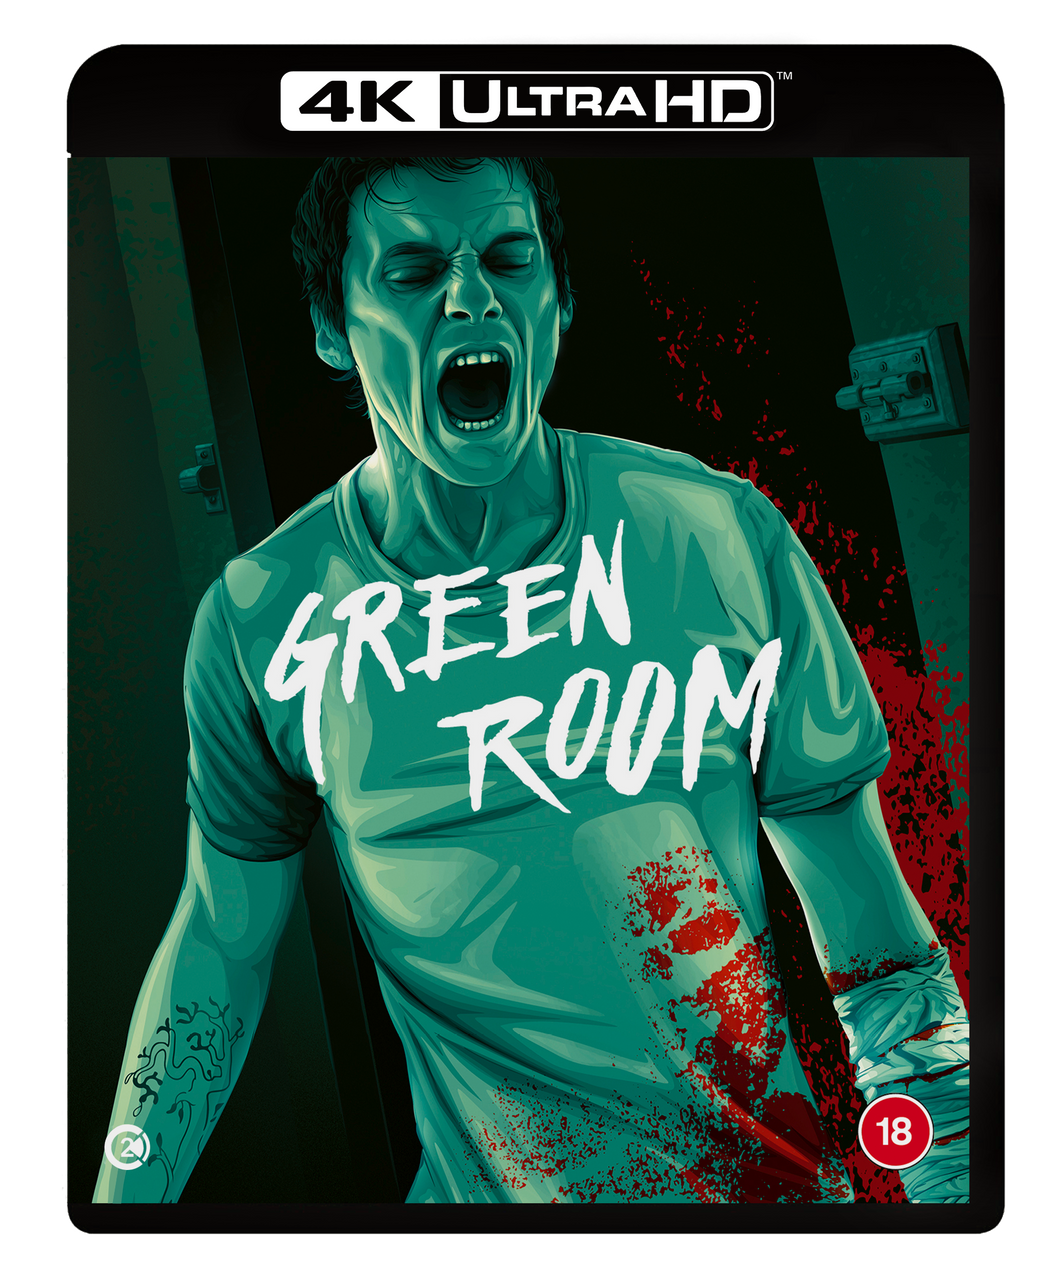 Green Room 4K UHD: Pre-Order Available March 18th